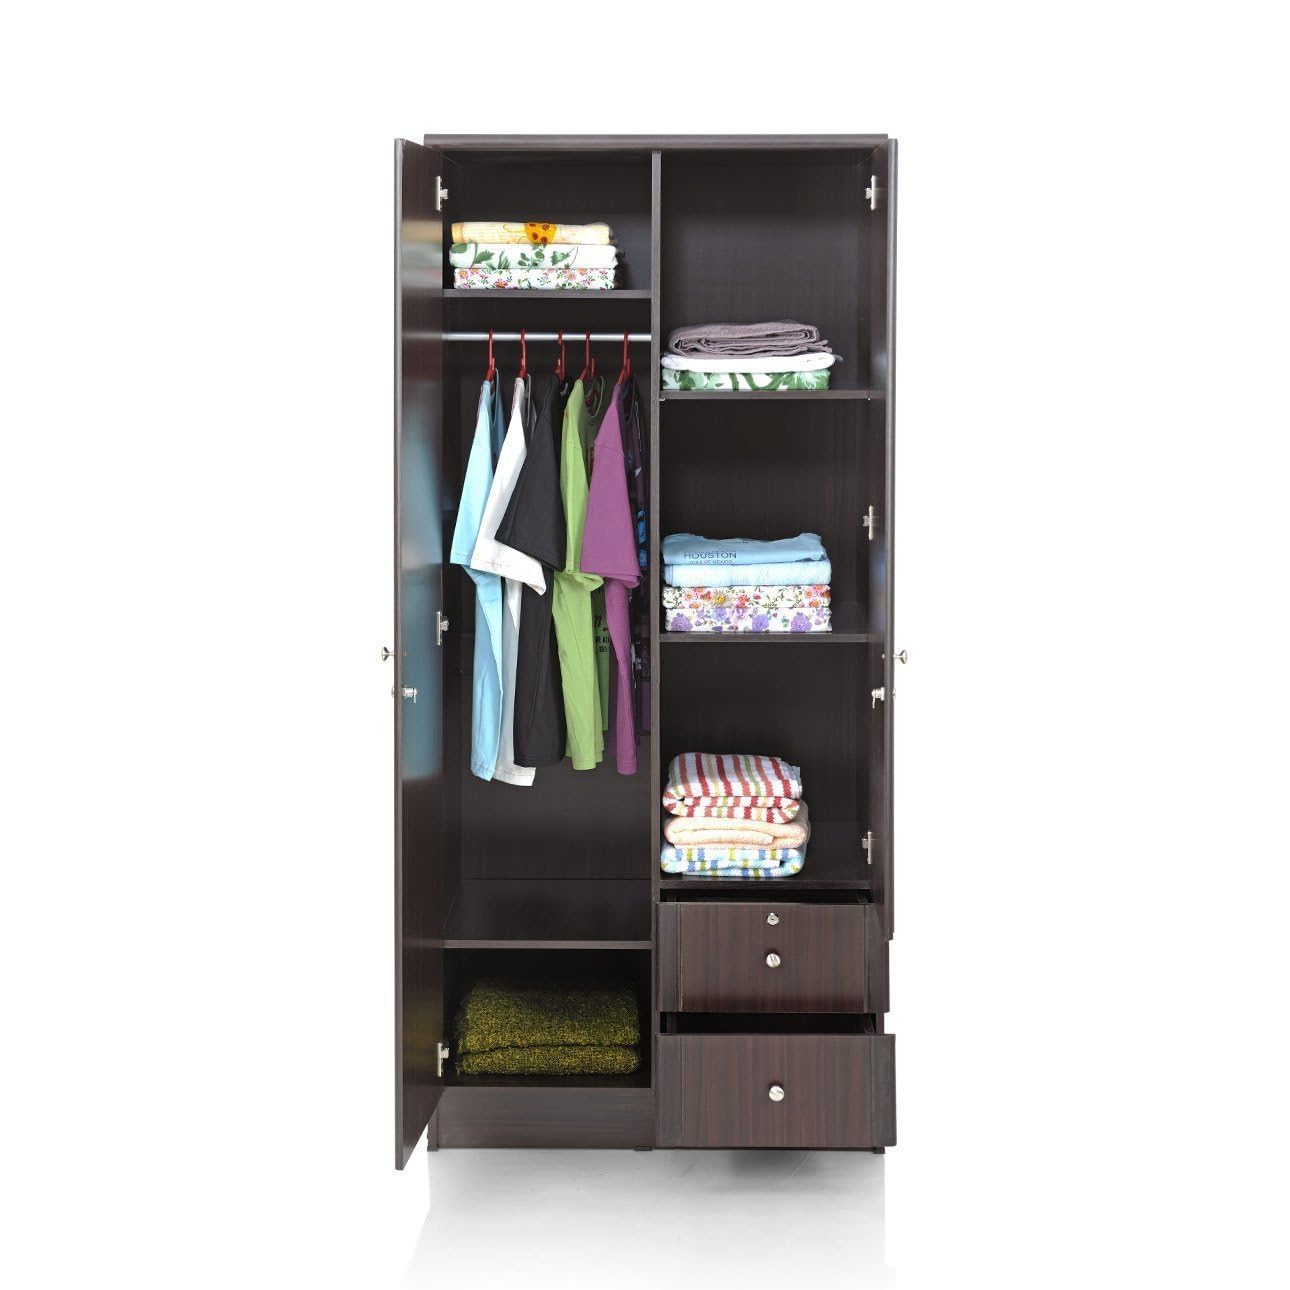 CASPIAN Furniture 2 Door Wardrobe with Mirror for Bedroom |Value Cupboard with Adequate 2 Drawers and Hanging Space for Clothes | Colour Rainforest Dark | Pre Assembled (Medium (Width 30 inches))